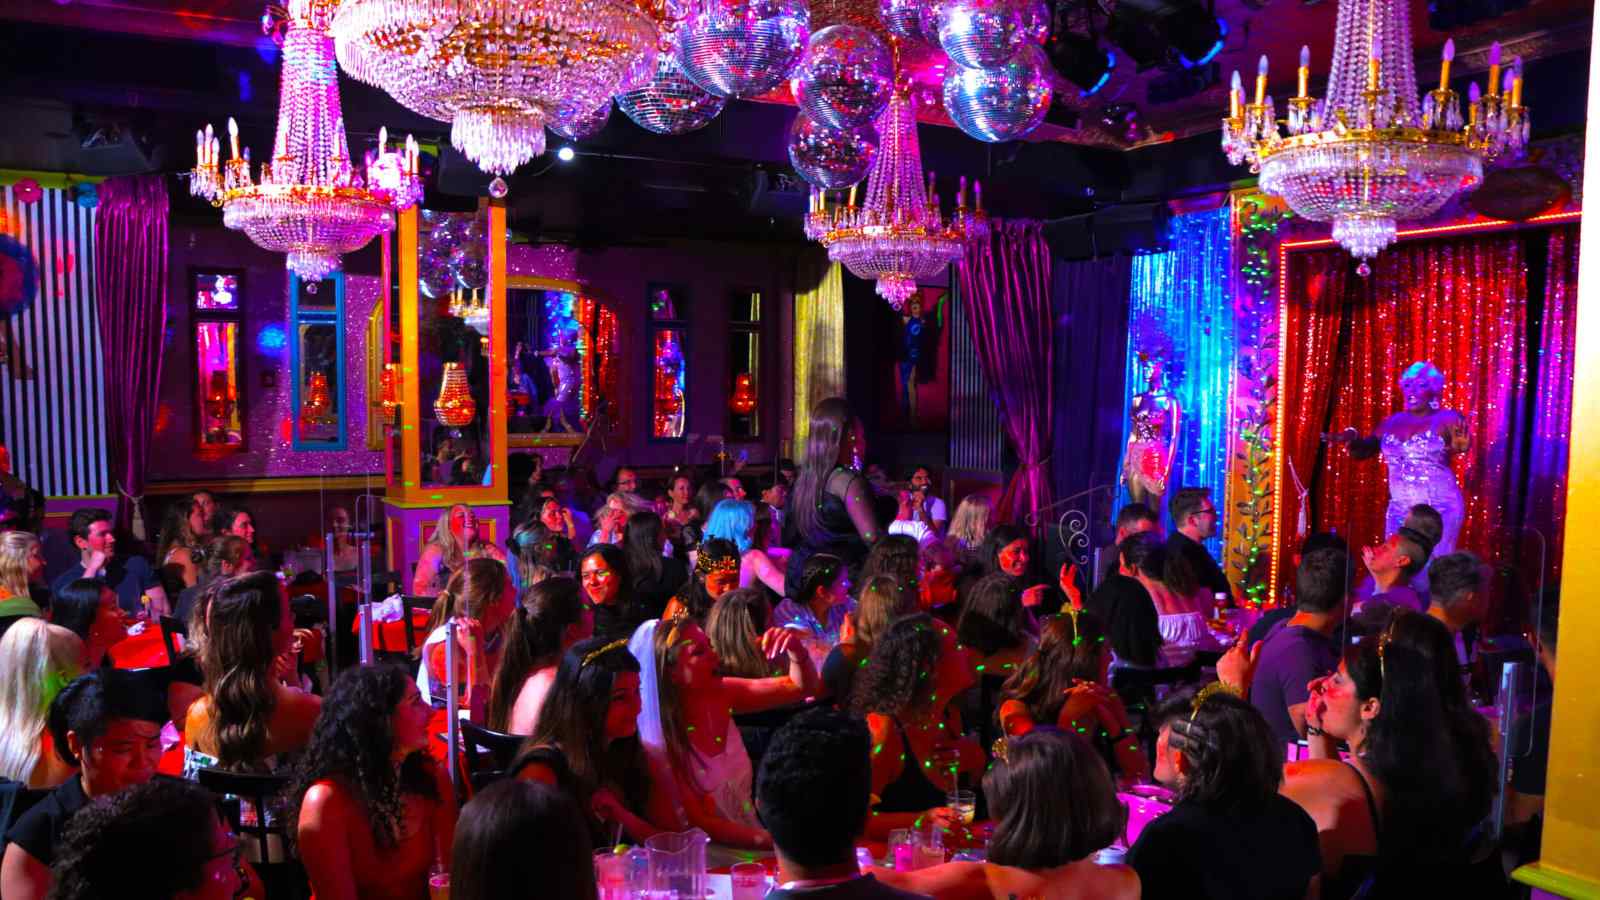 A crowd of patrons enjoying food and drag performances at Lips drag dining in New York City.